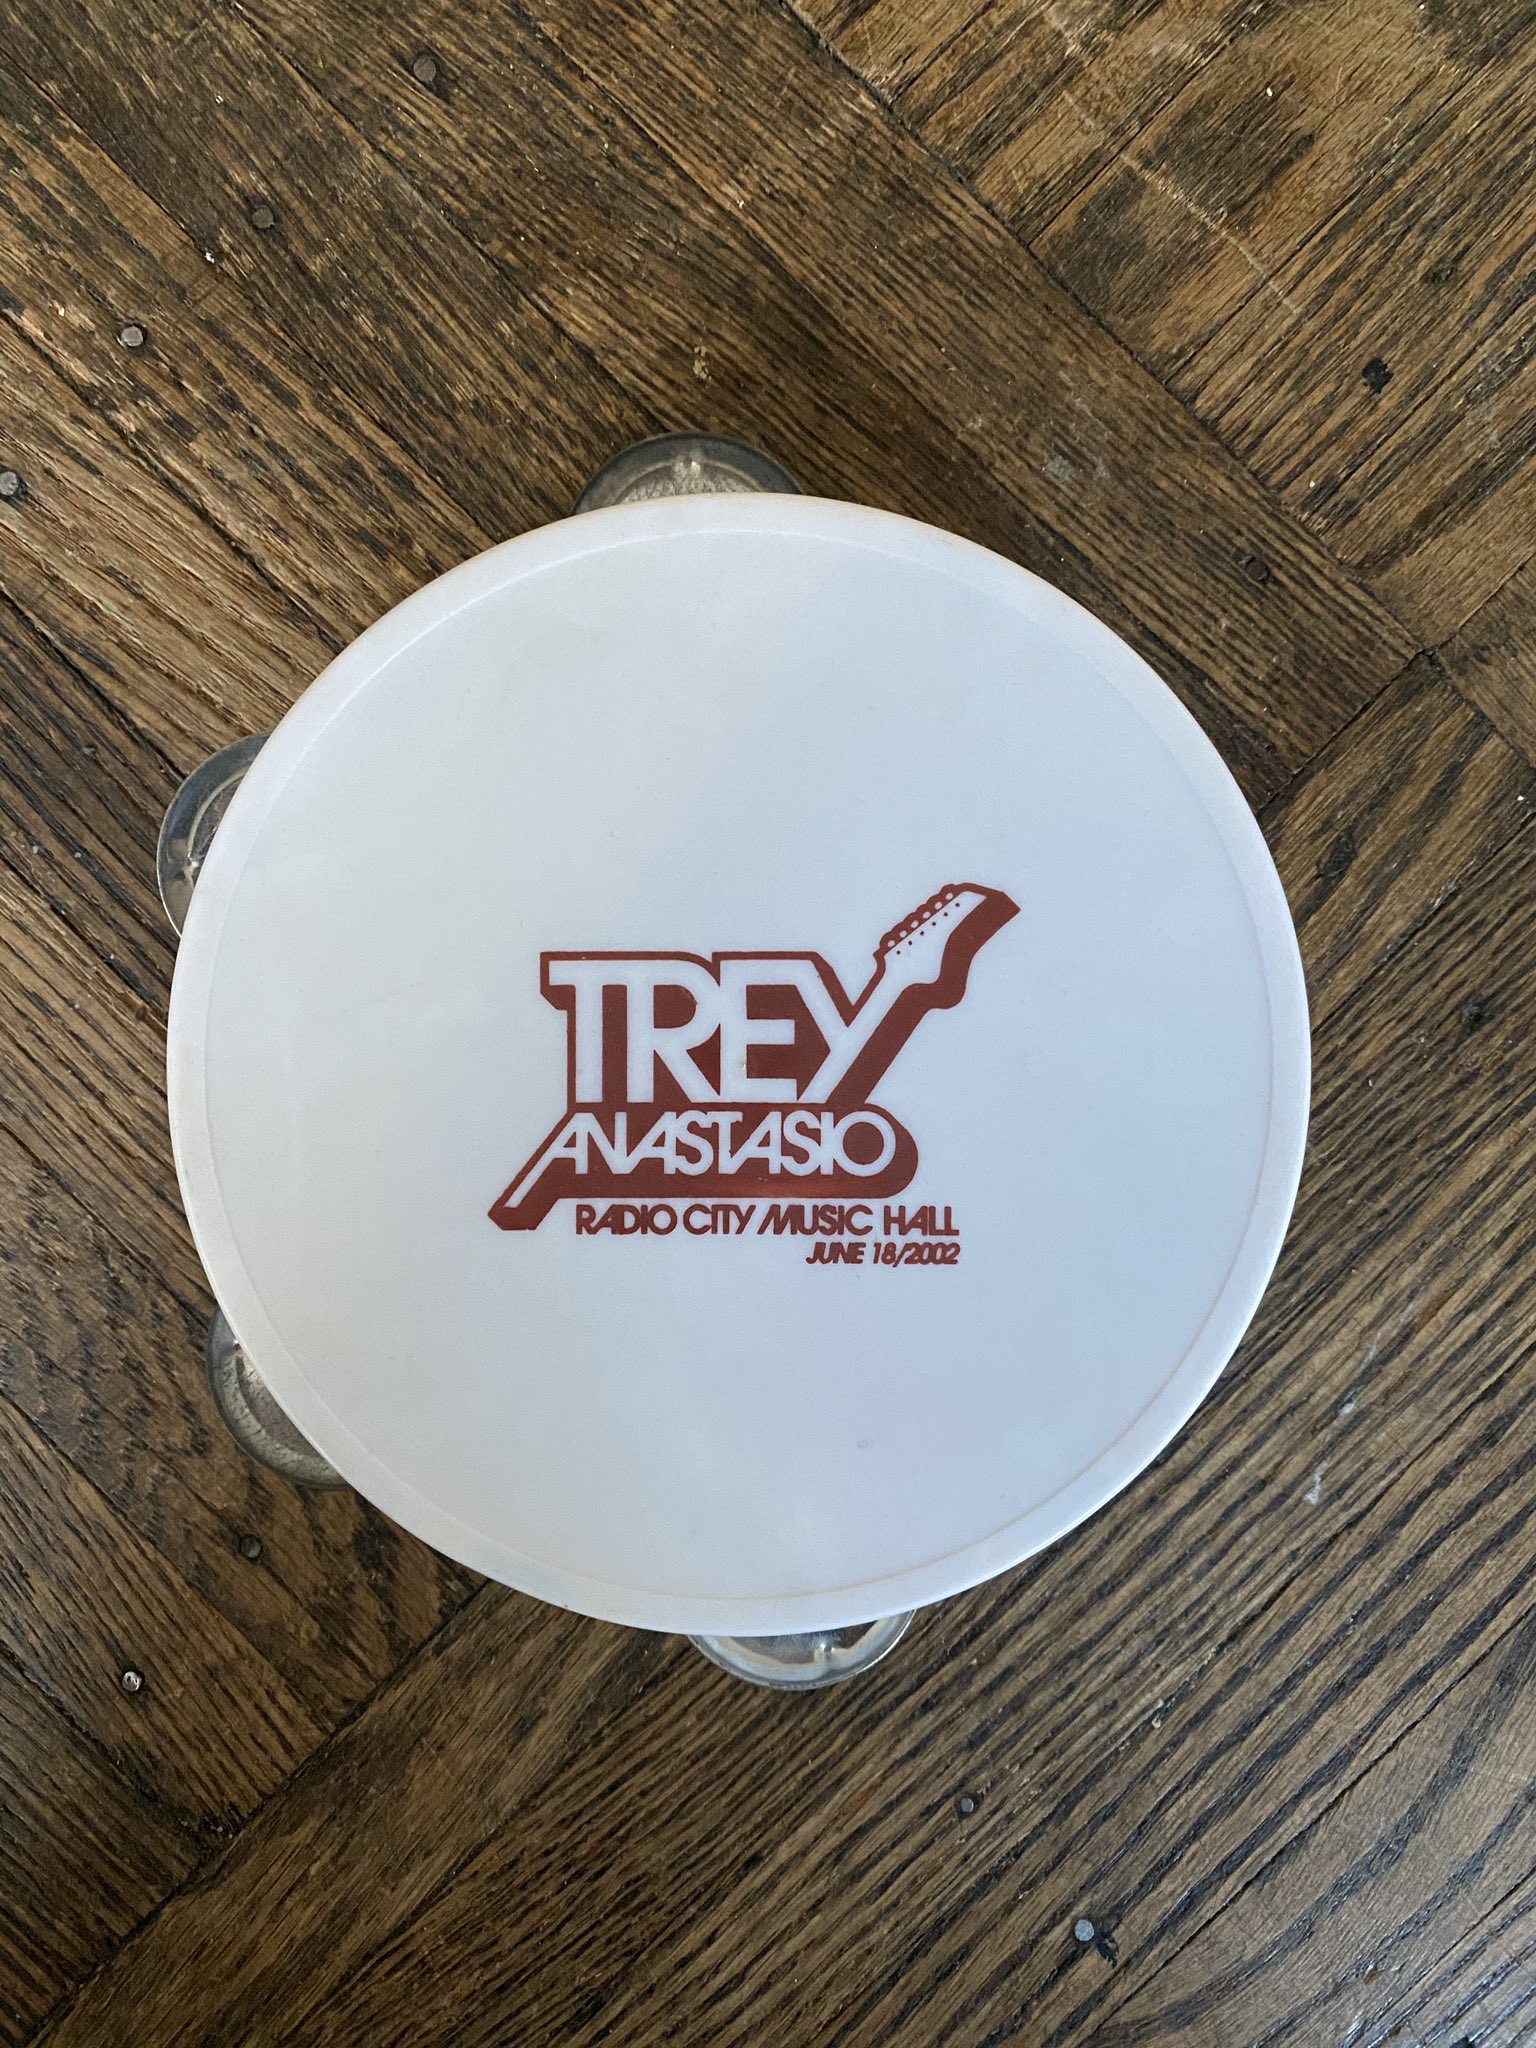 Trey Anastasio is 56 today. You can only wish him a happy birthday if you have a tambourine from 6/18/02. 